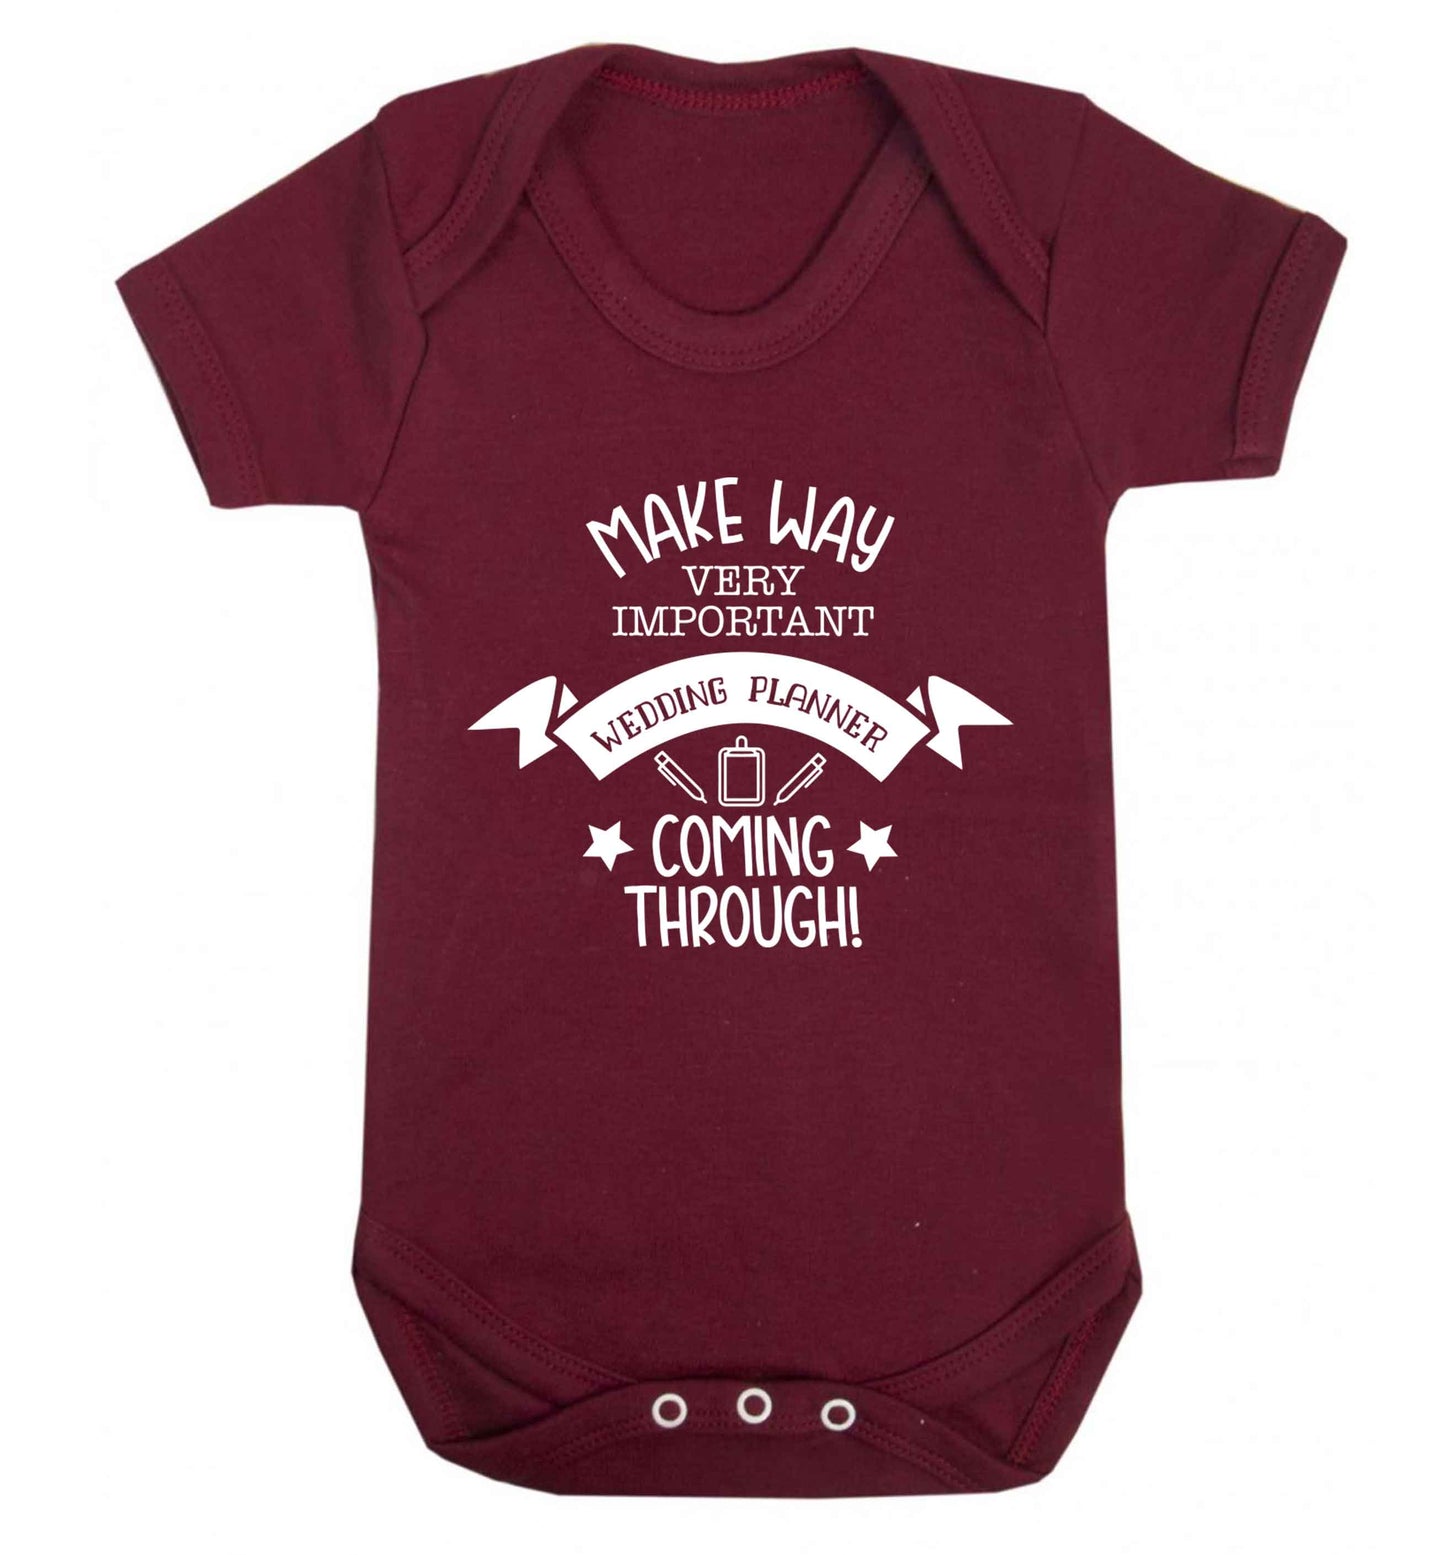 Make way very important wedding planner coming through Baby Vest maroon 18-24 months